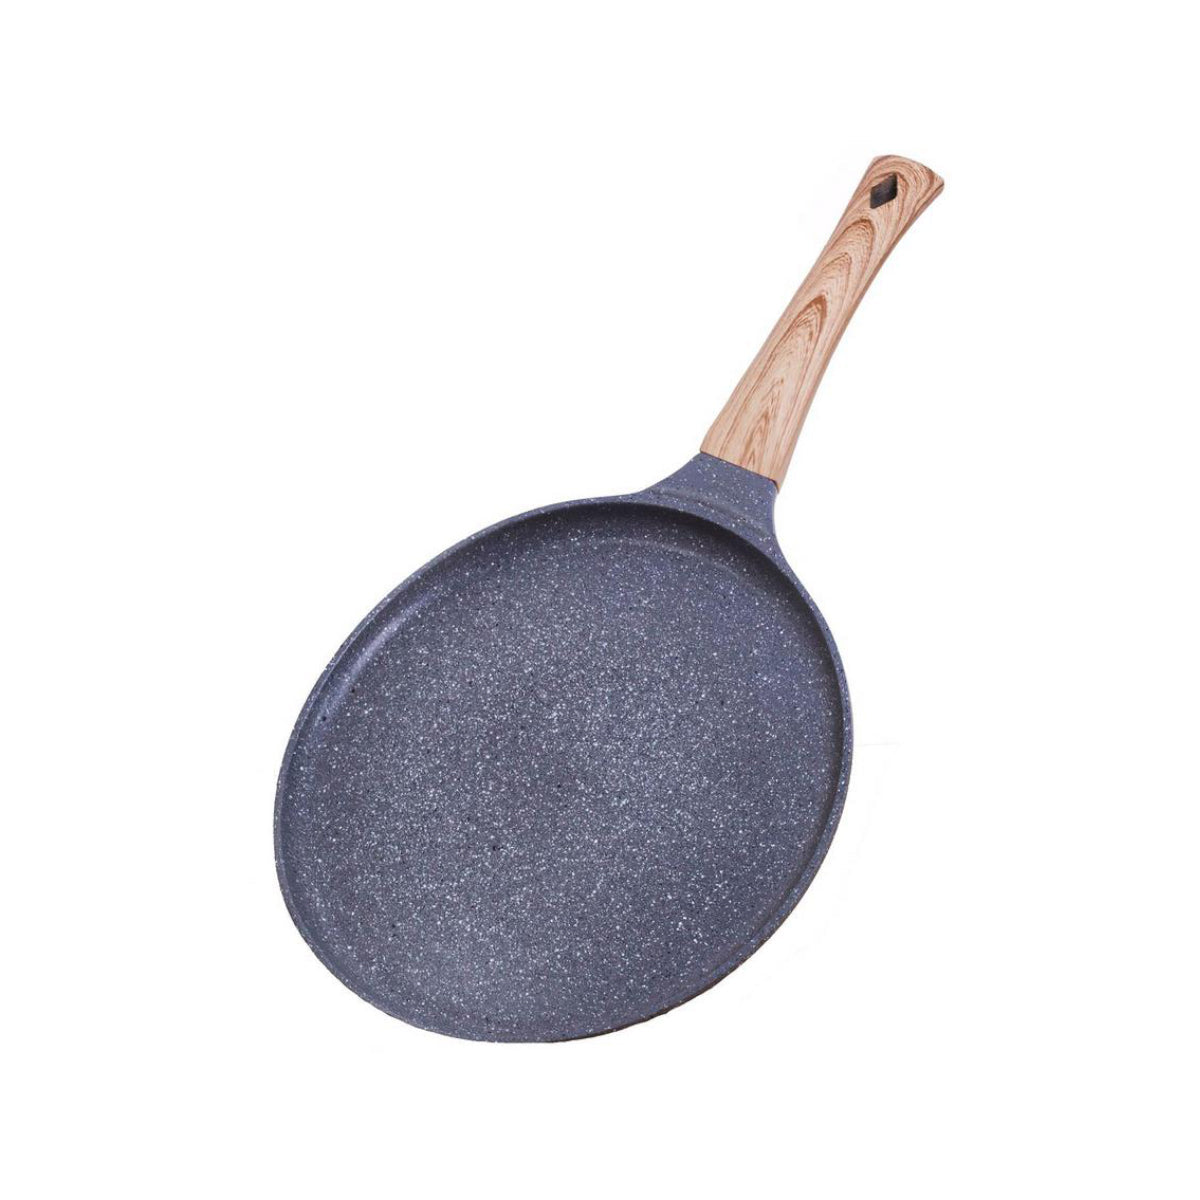 Wooden Handle Non-Stick Frying Pan